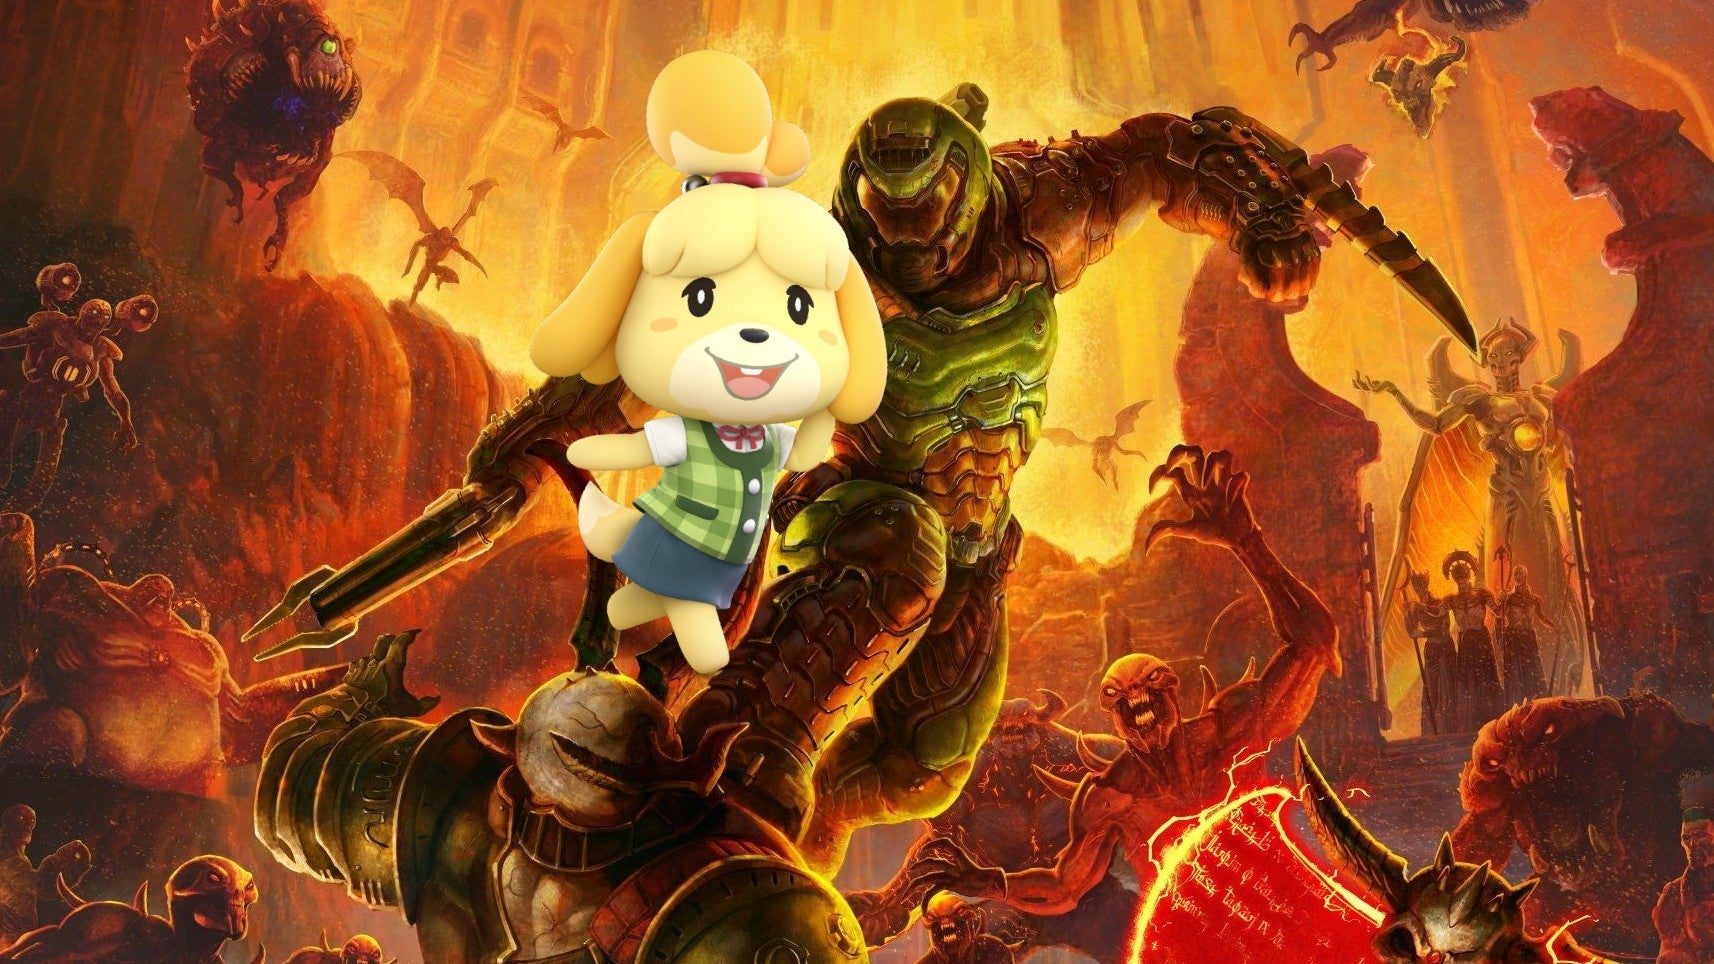 The Doom and Animal Crossing fandoms wish each other luck, are